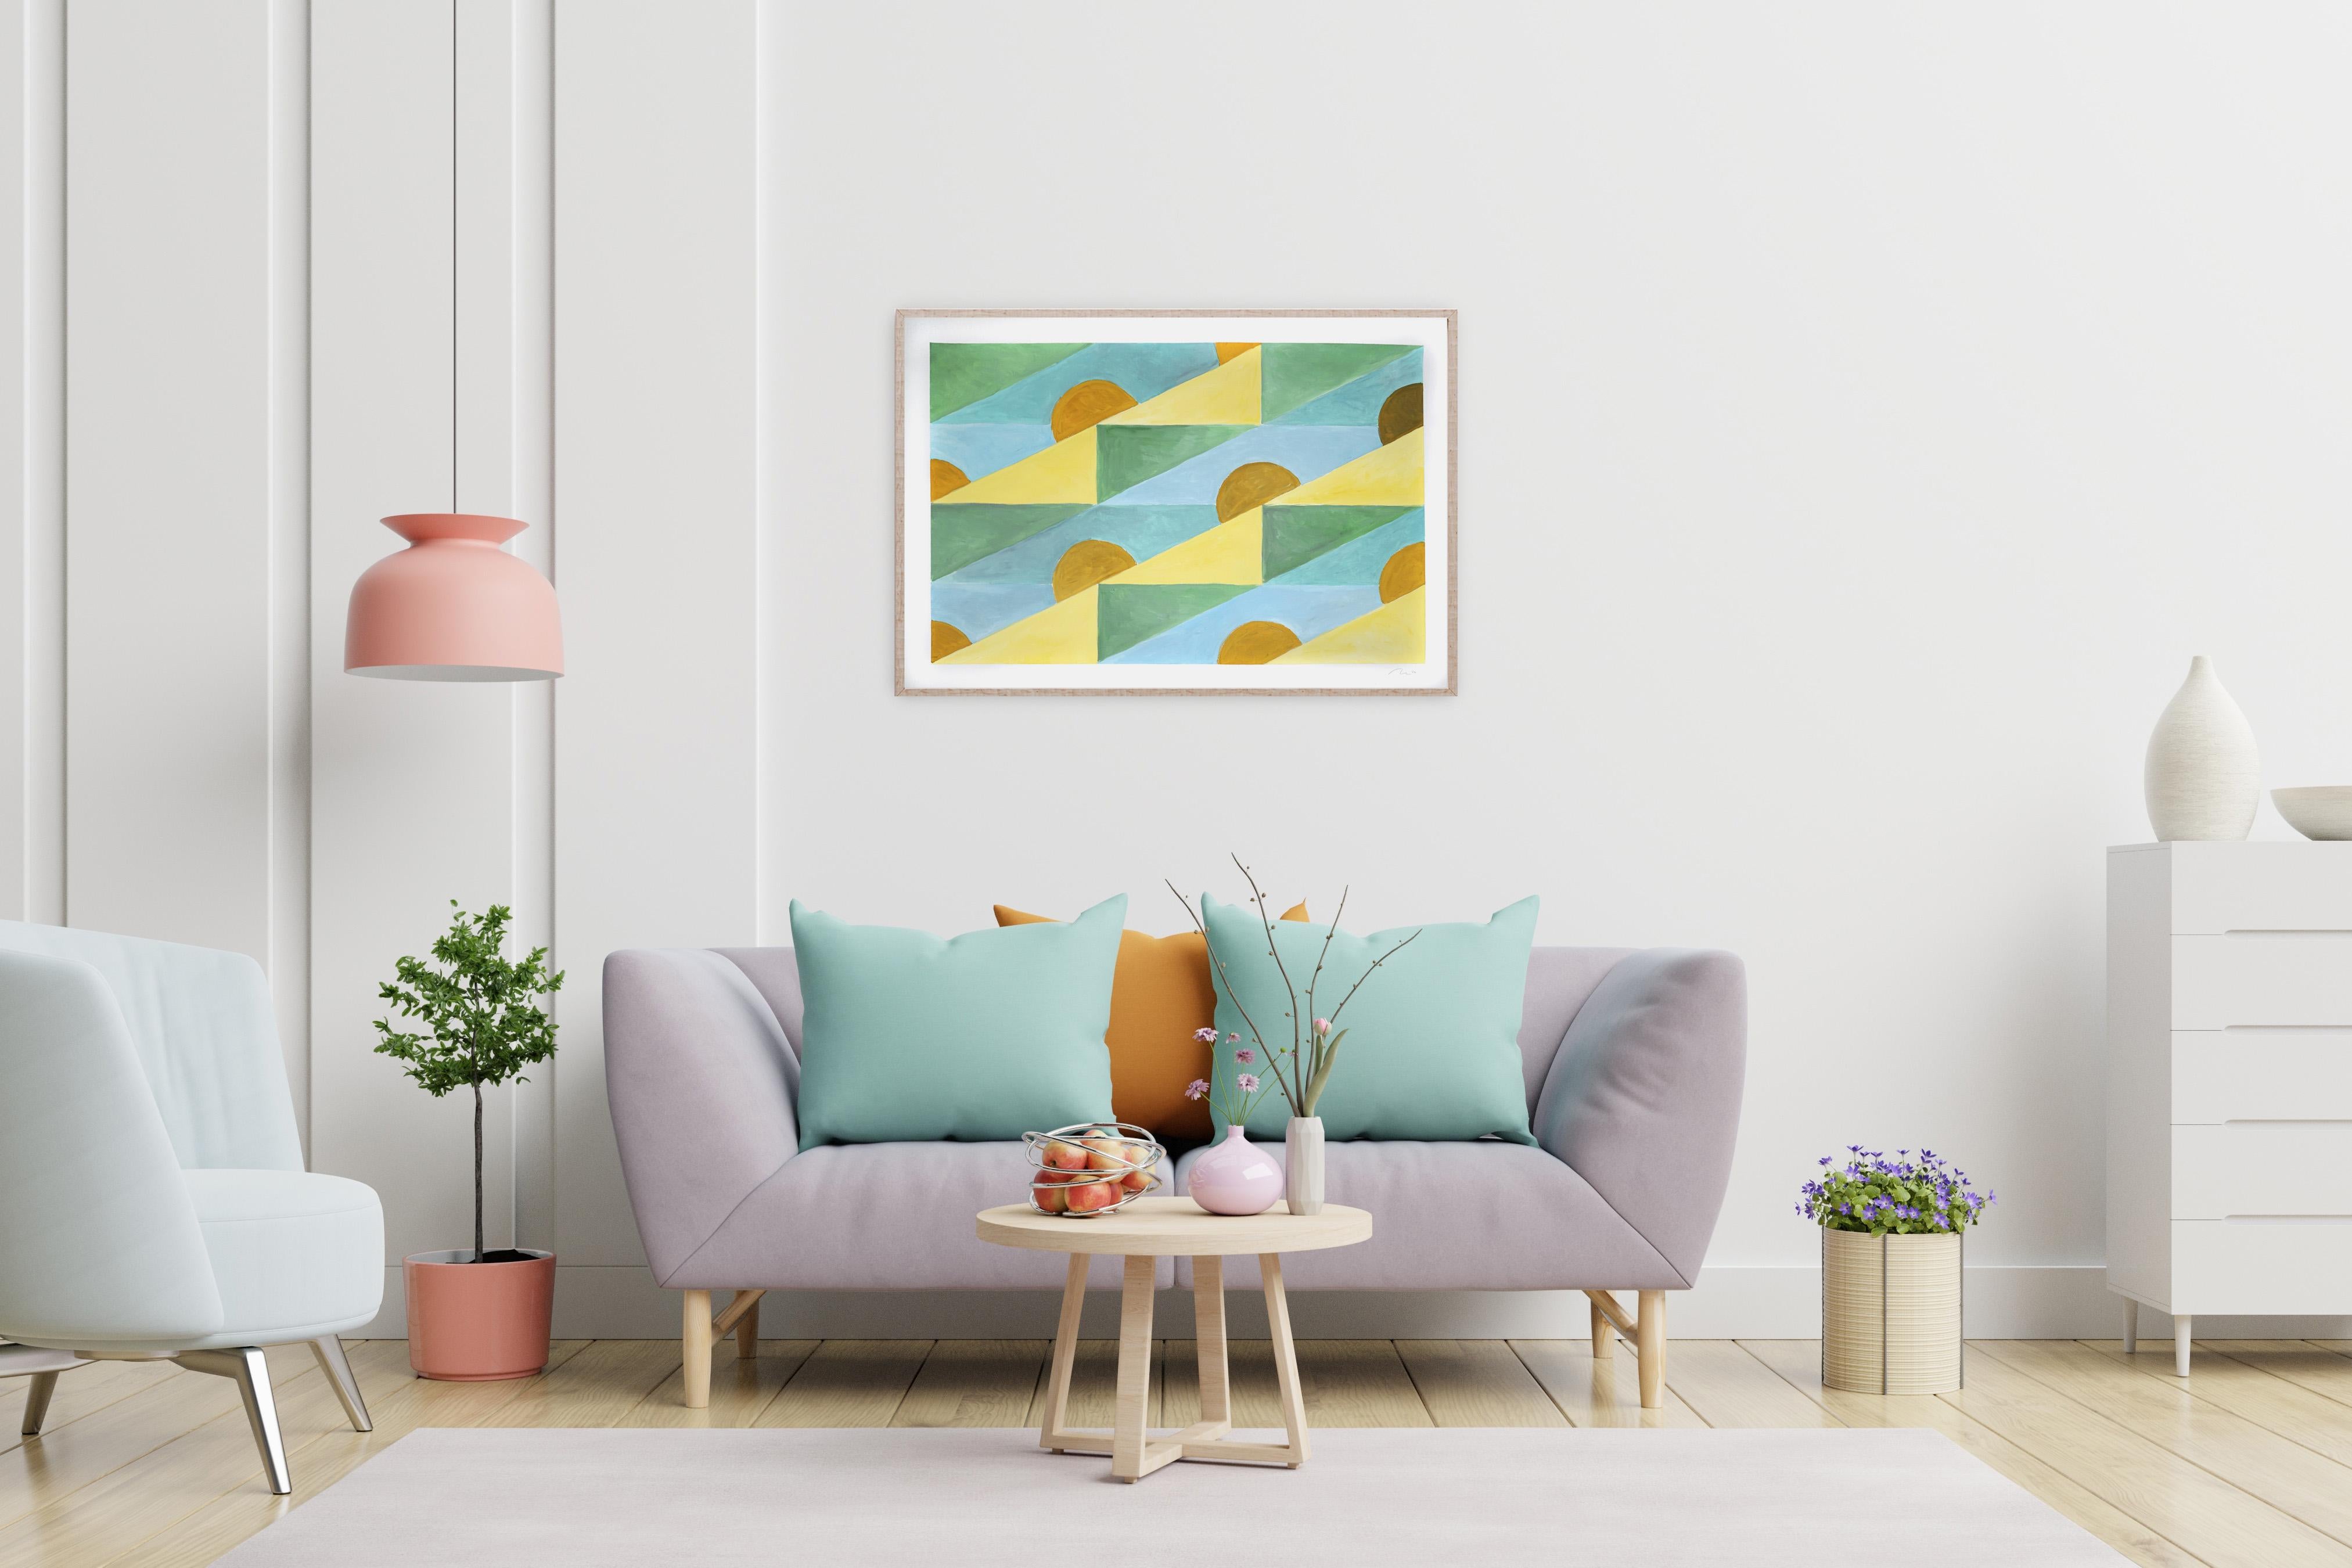 These series of paintings by Natalia Roman gather their inspiration from geometric, minimalist shapes and paintings from the beginning of Modernism, with a special emphasis on Art Deco shapes of the 30's, 40's and 50's. The subtle but chic color